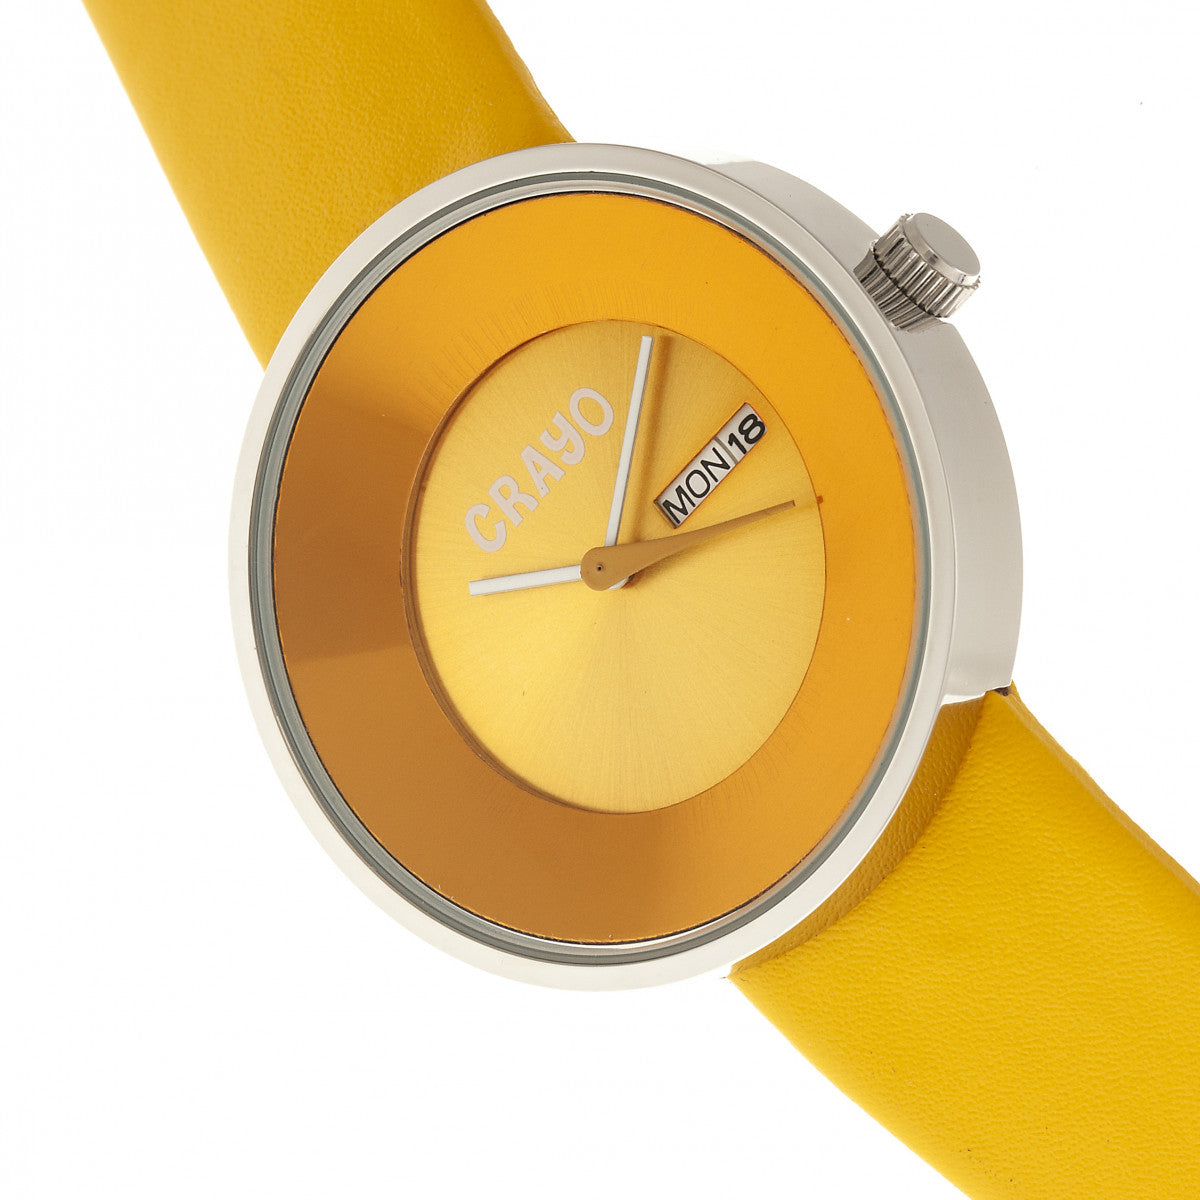 Crayo Button Leather-Band Unisex Watch w/ Day/Date - Yellow - CRACR0204